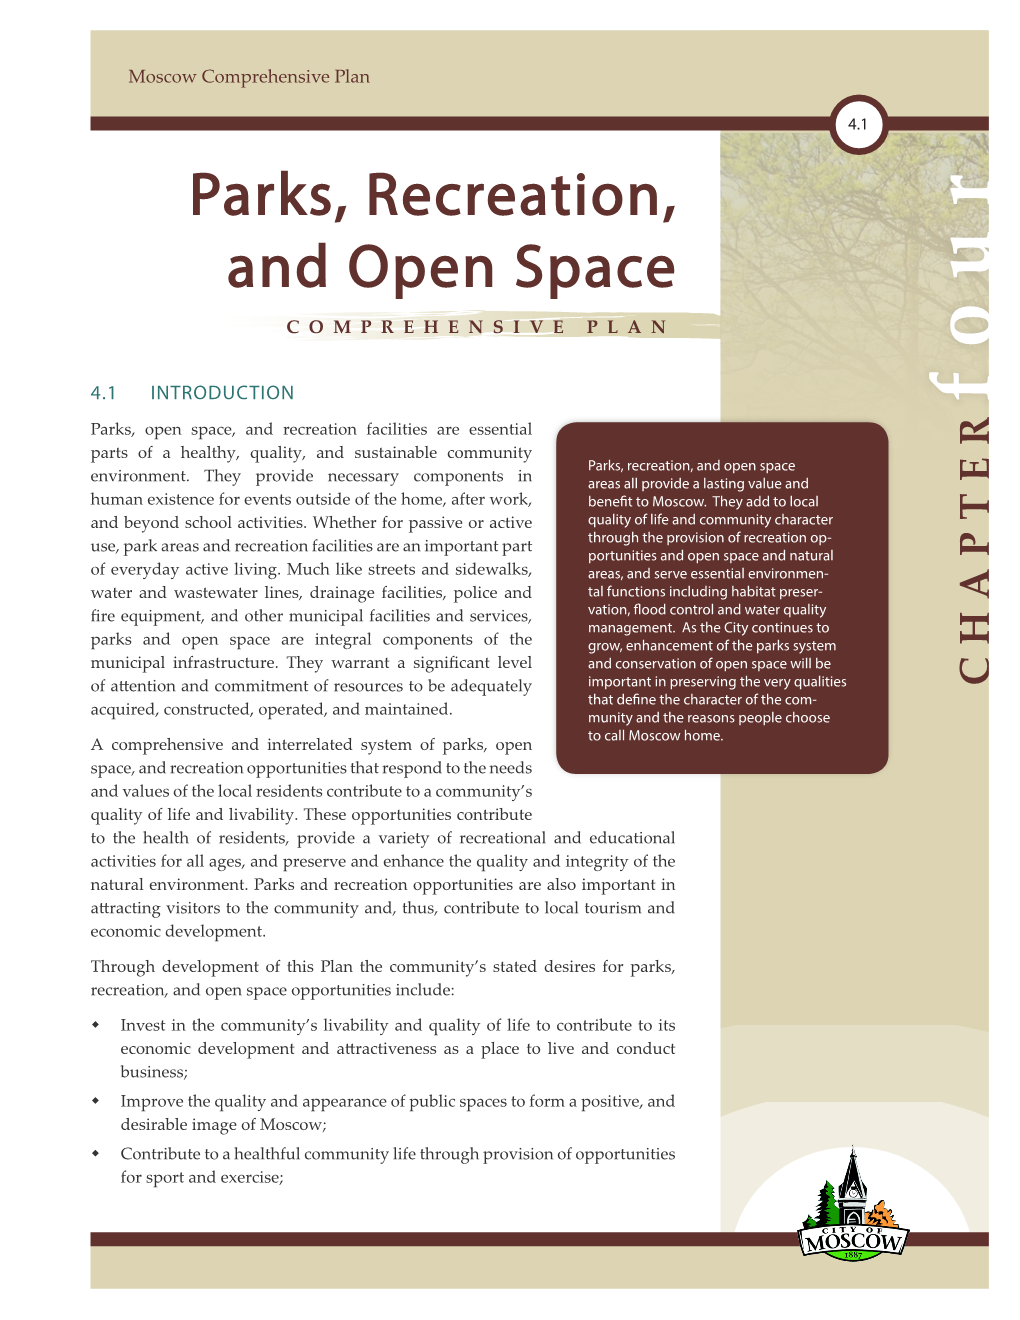 Parks, Recreation, and Open Space